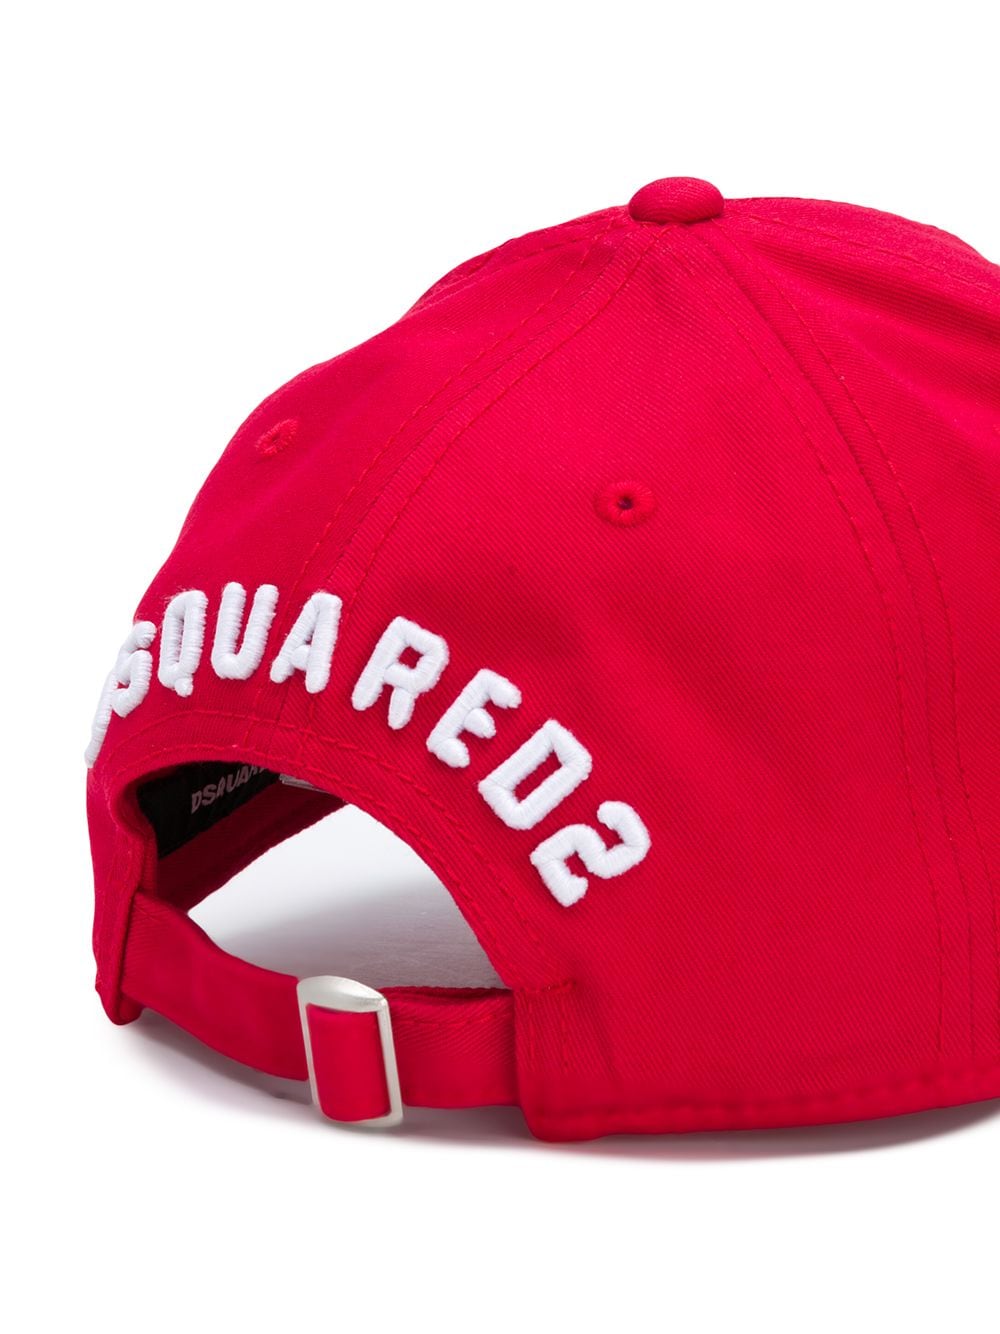 DSQUARED2 Red/Black Icon Baseball Cap - Men from Brother2Brother UK